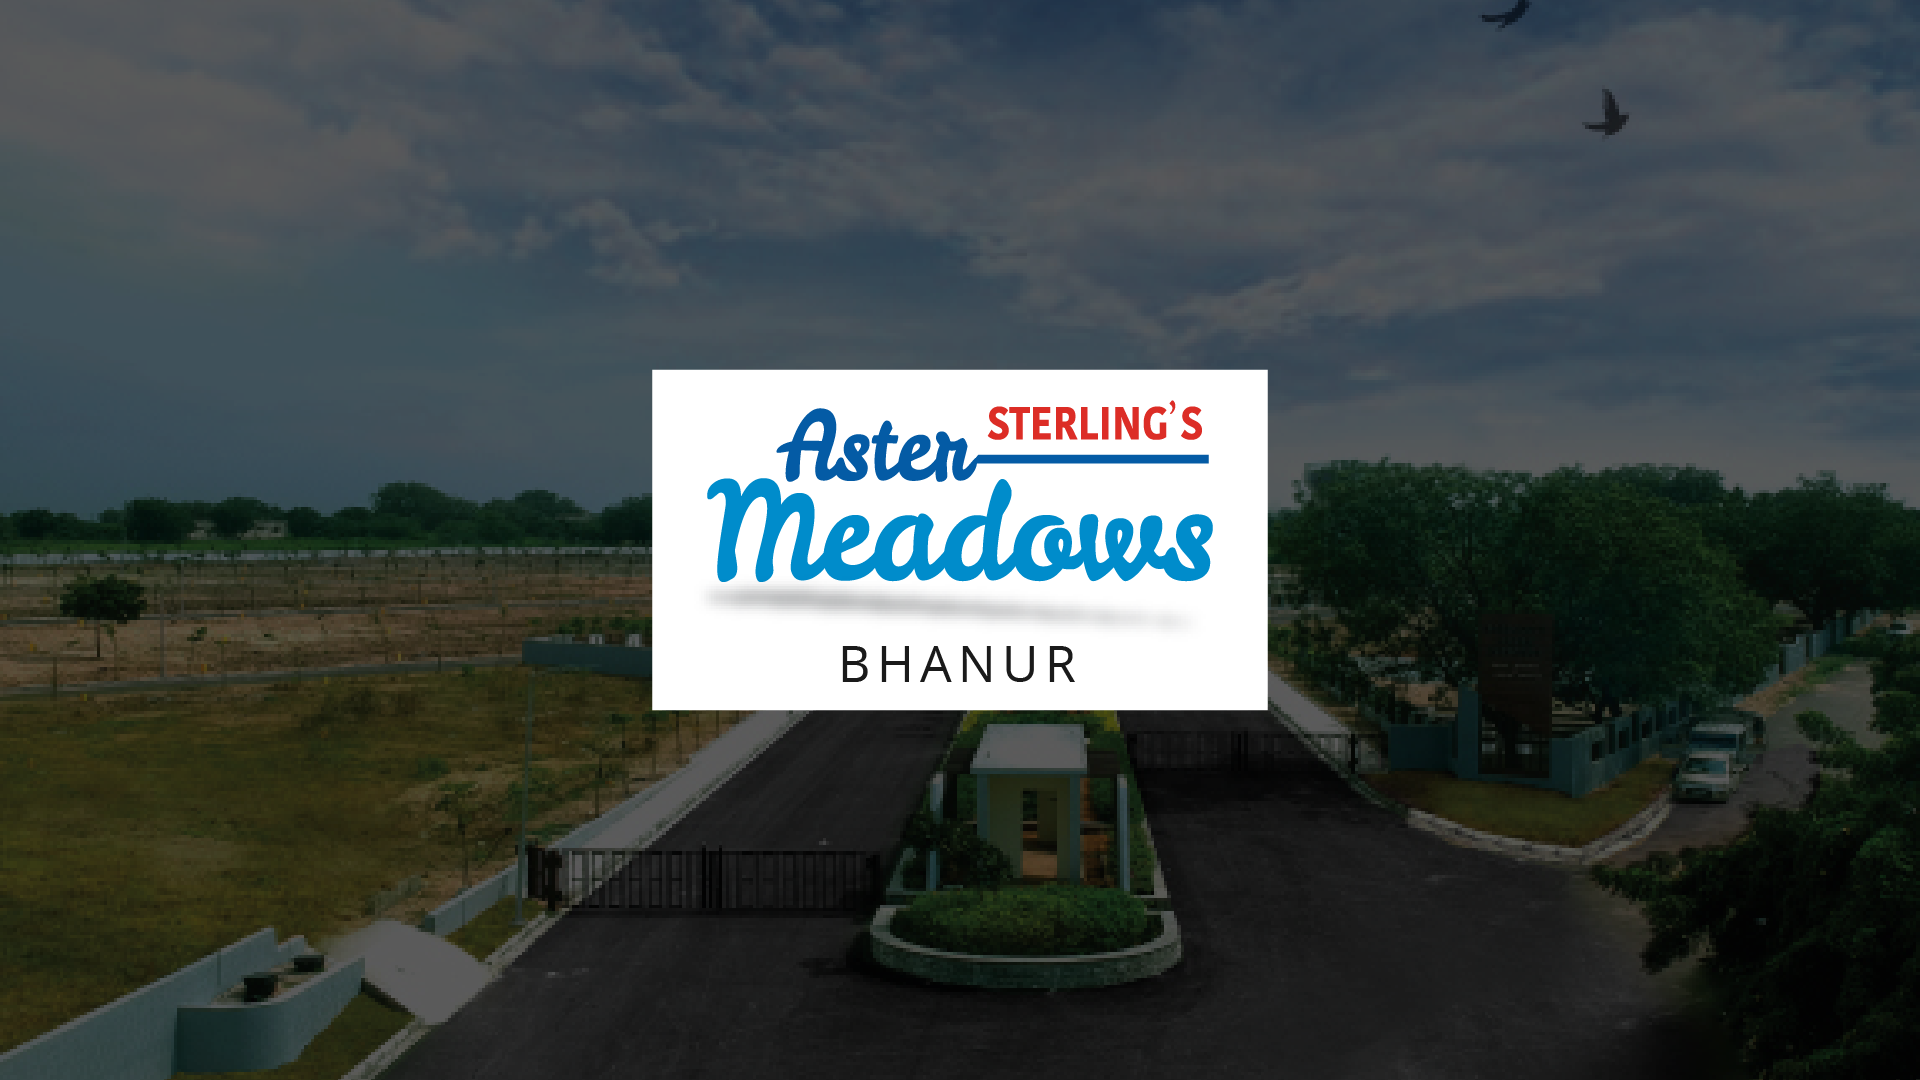 Sterling's Aster Meadows at Bhanur